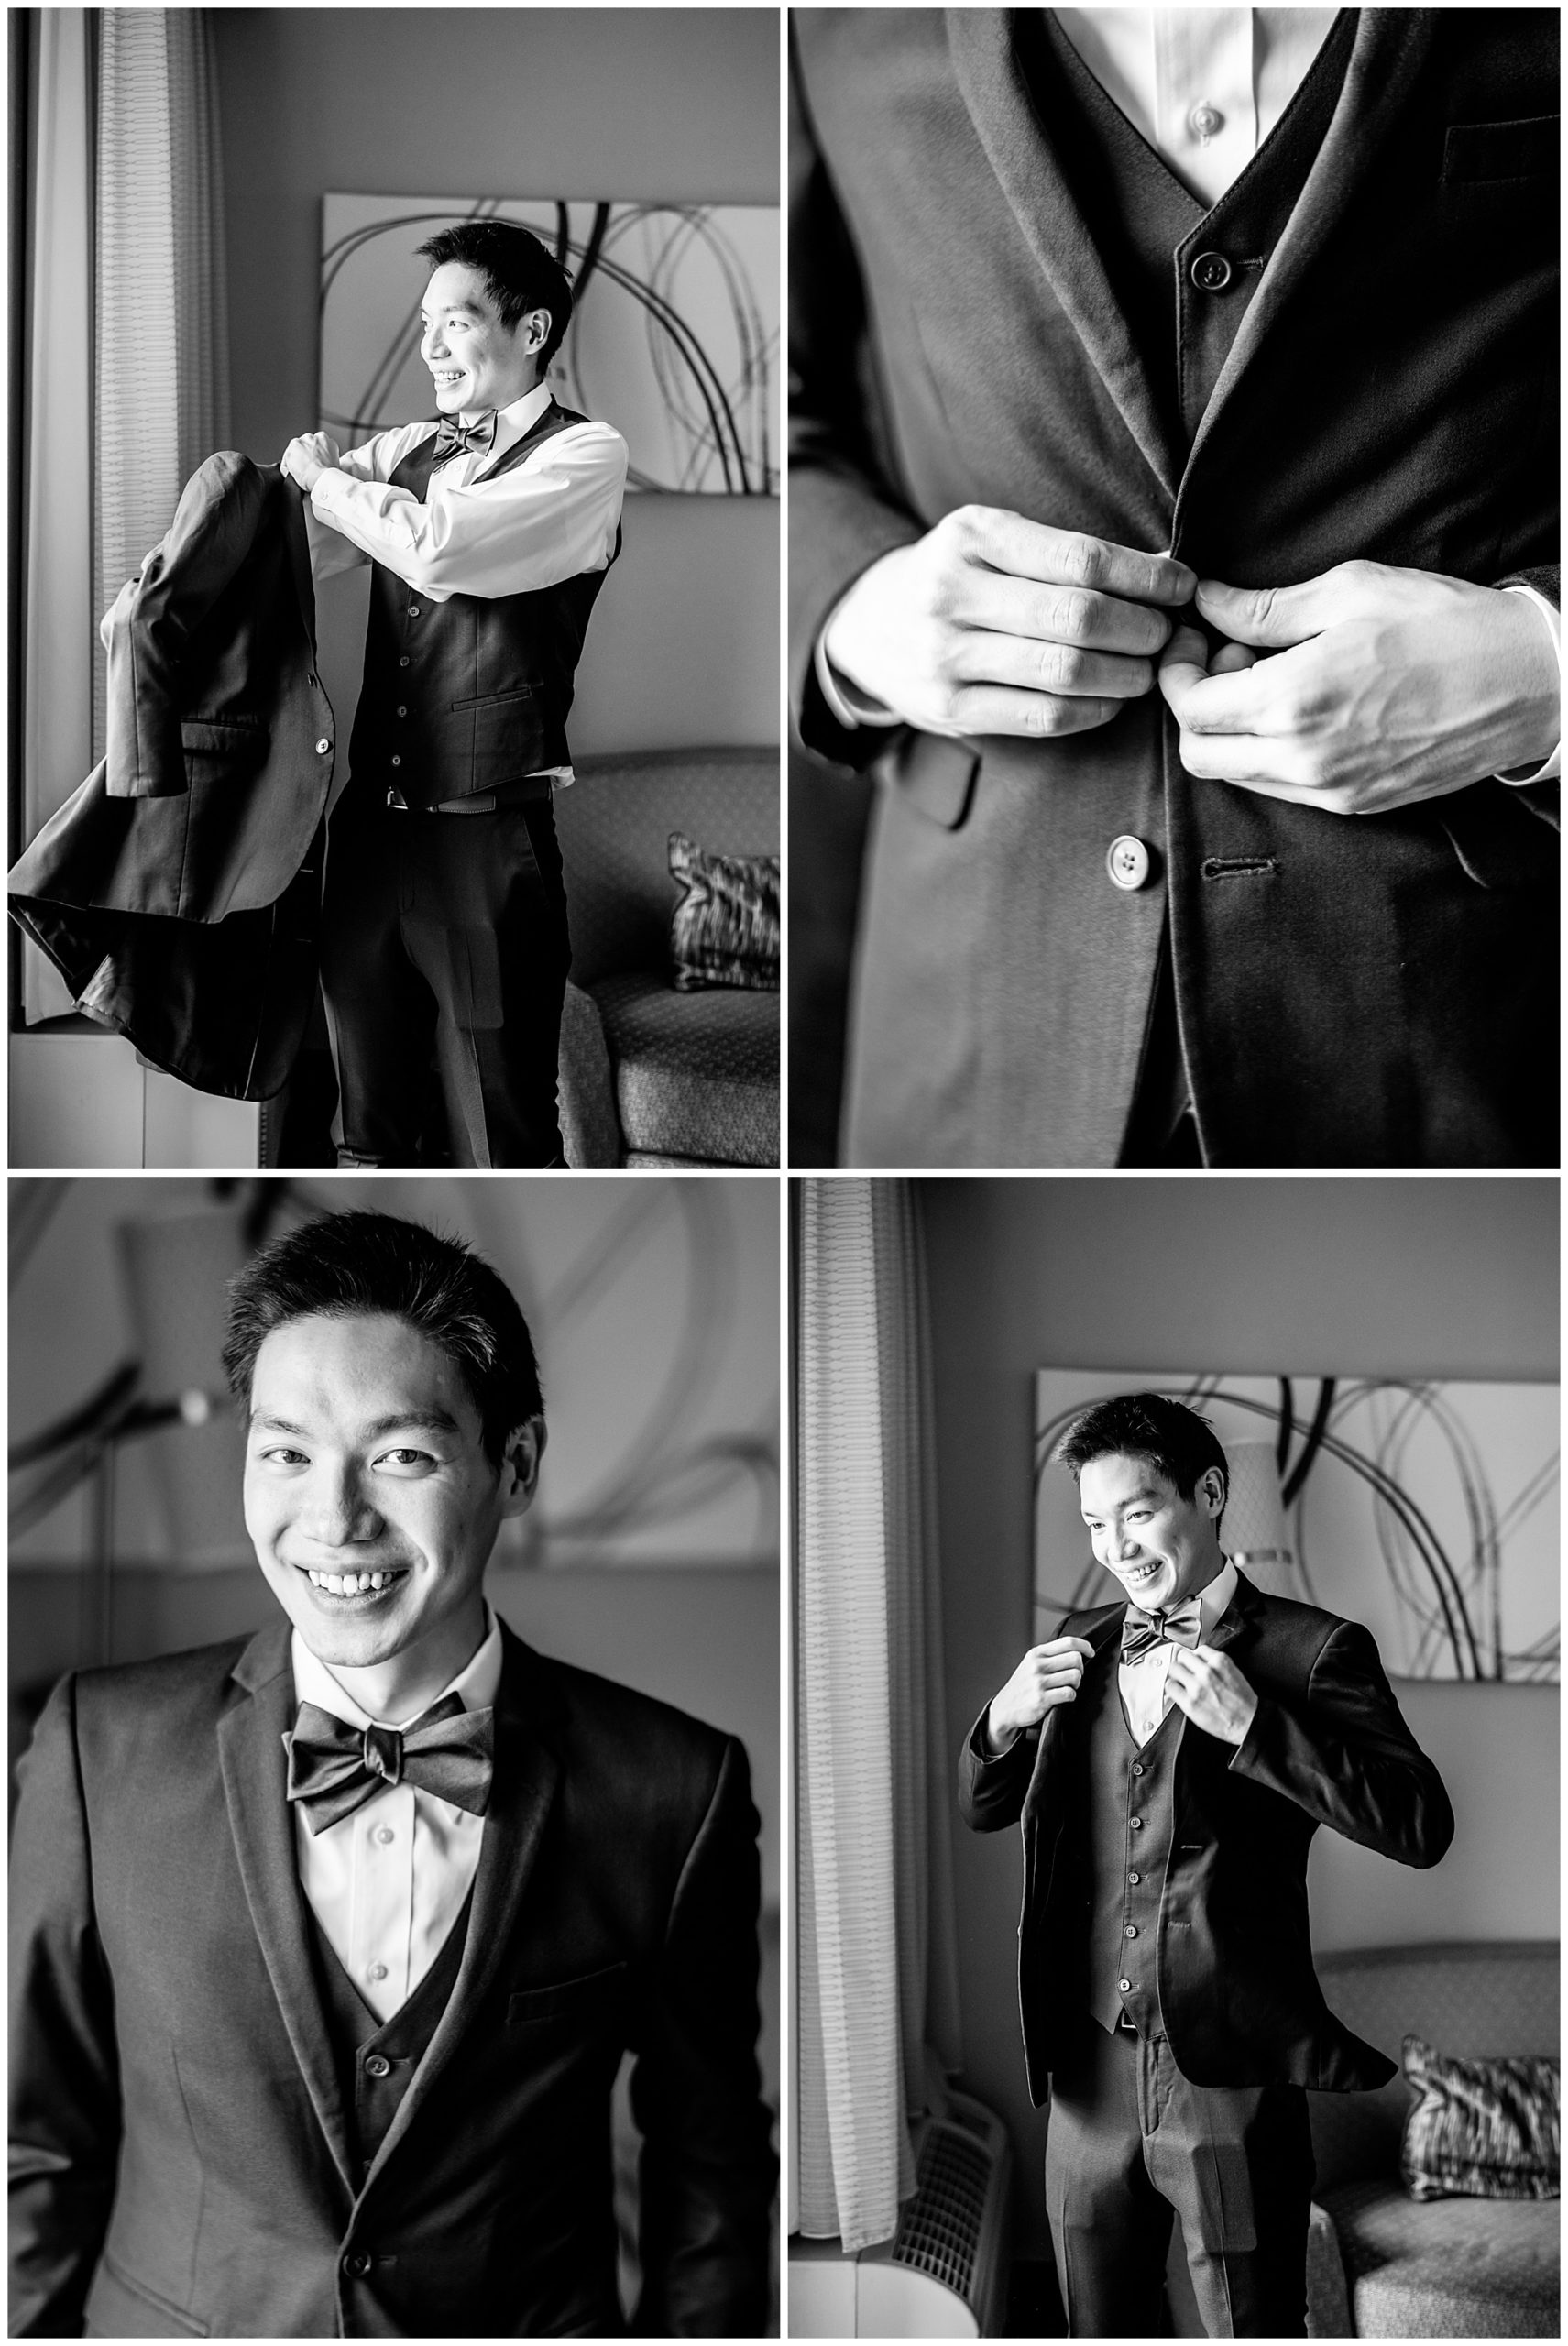 spring Westfields Golf Club wedding, Clifton Virginia wedding, northern Virginia wedding venue, DC wedding photographer, DC photographer, Virginia country club wedding, spring wedding aesthetic, Chinese American wedding, Rachel E.H.Photography, black and white, groom getting ready, groom buttoning jacket